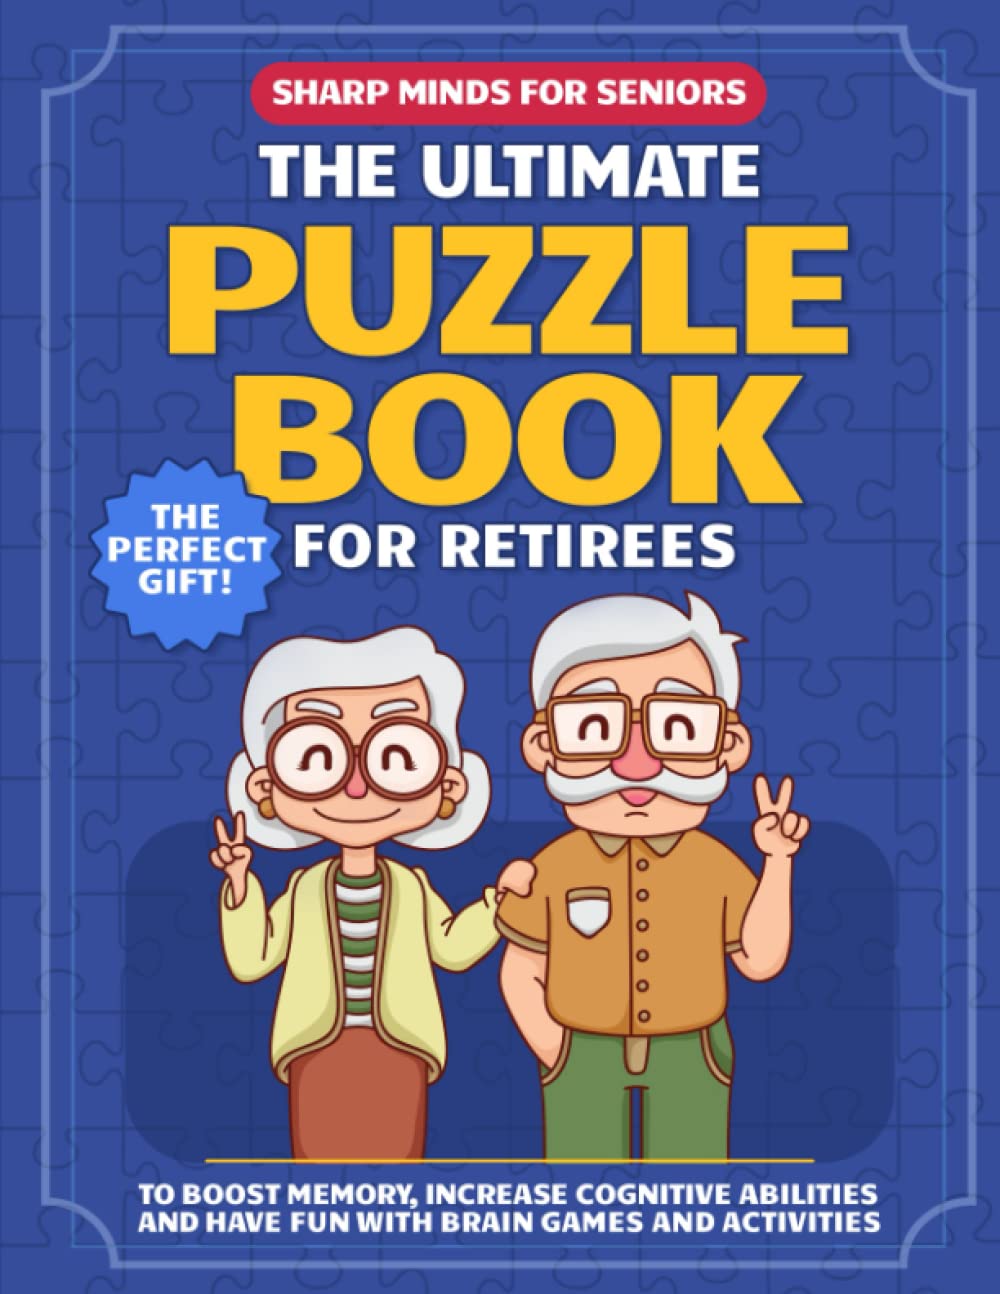 Sharp Minds for Seniors: The Ultimate Puzzle Book for Retirees to Boost Memory, Increase Cognitive Abilities and Have Fun with Brain Games and Activities (The Perfect Gift)